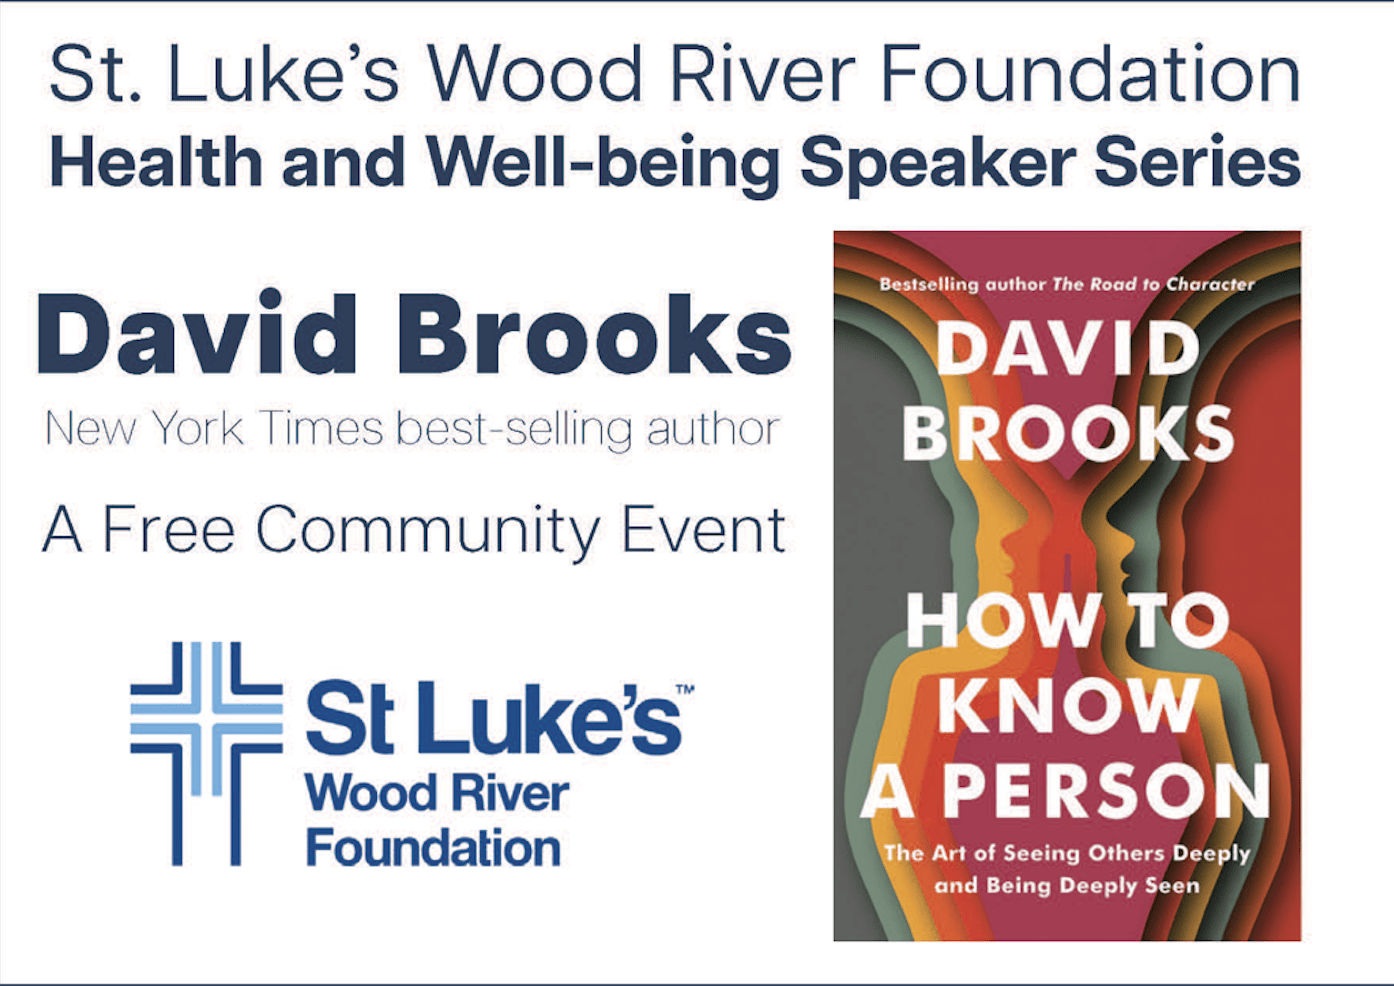 David Brooks How to Know a Person: The Art of Seeing Others Deeply and Being Deeply Seen